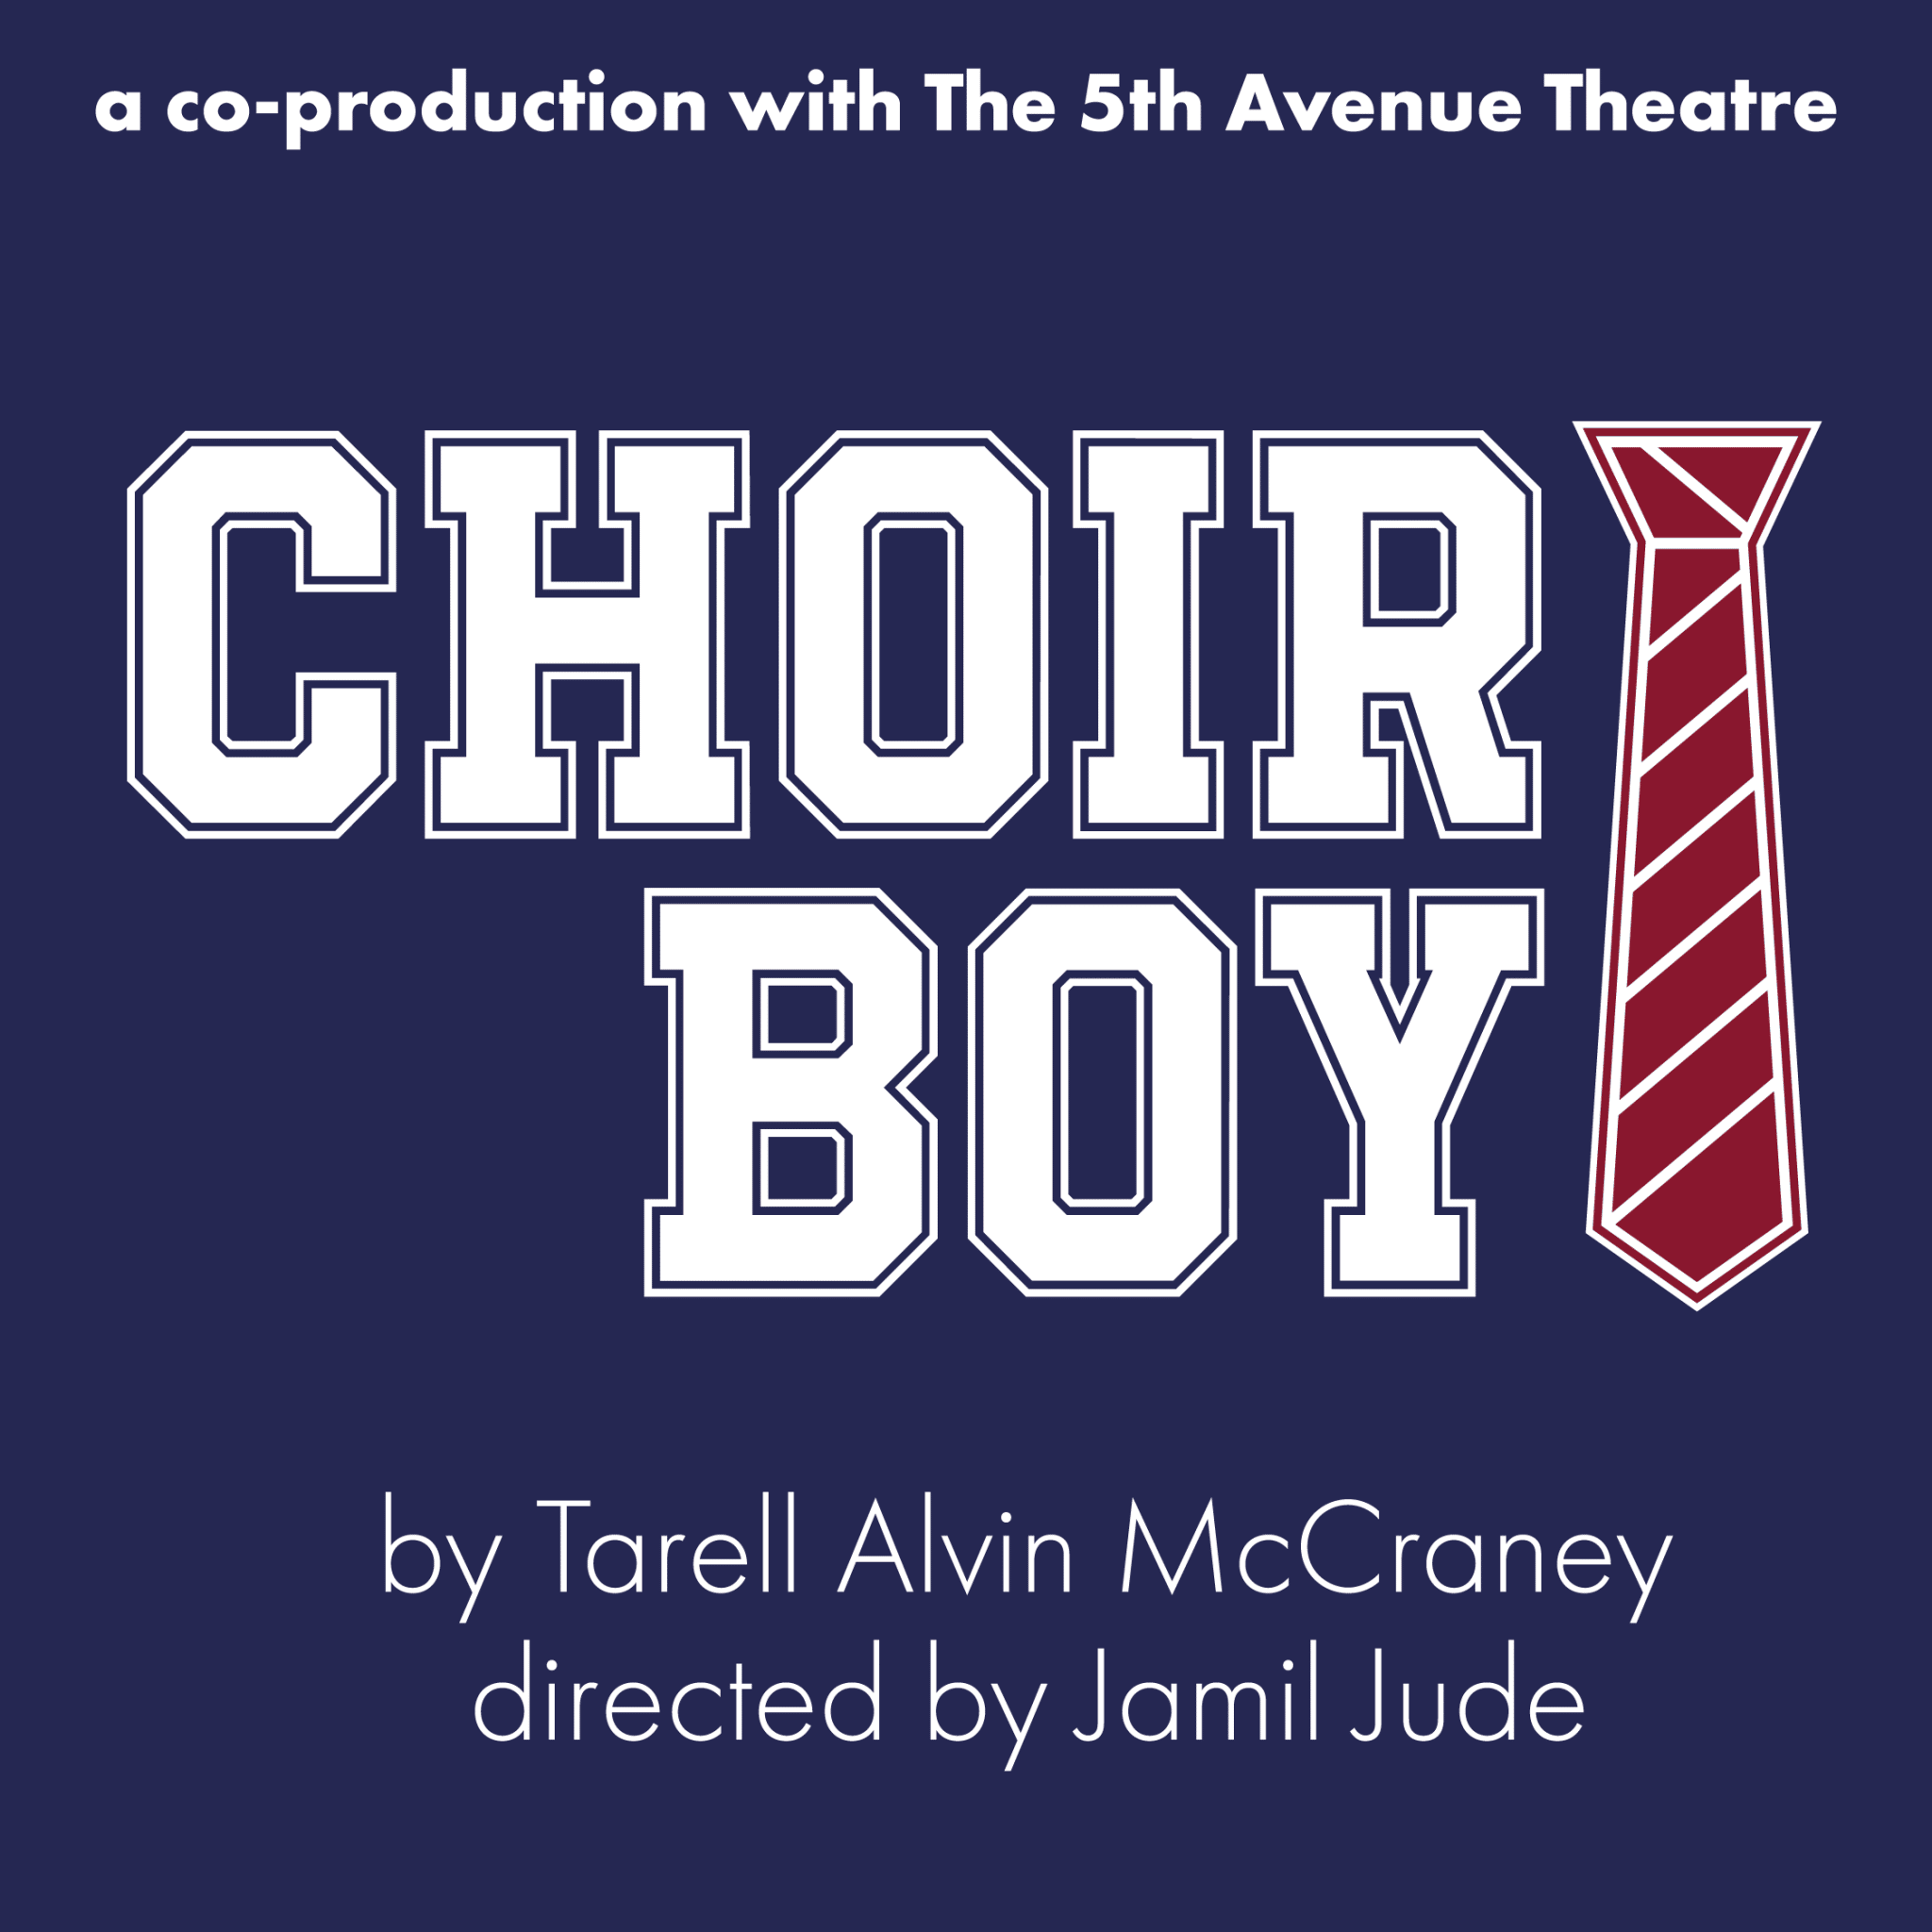 Choir Boy by Tarell Alvin McCraney directed by Jamil Jude a co-production with The 5th Avenue Theatre